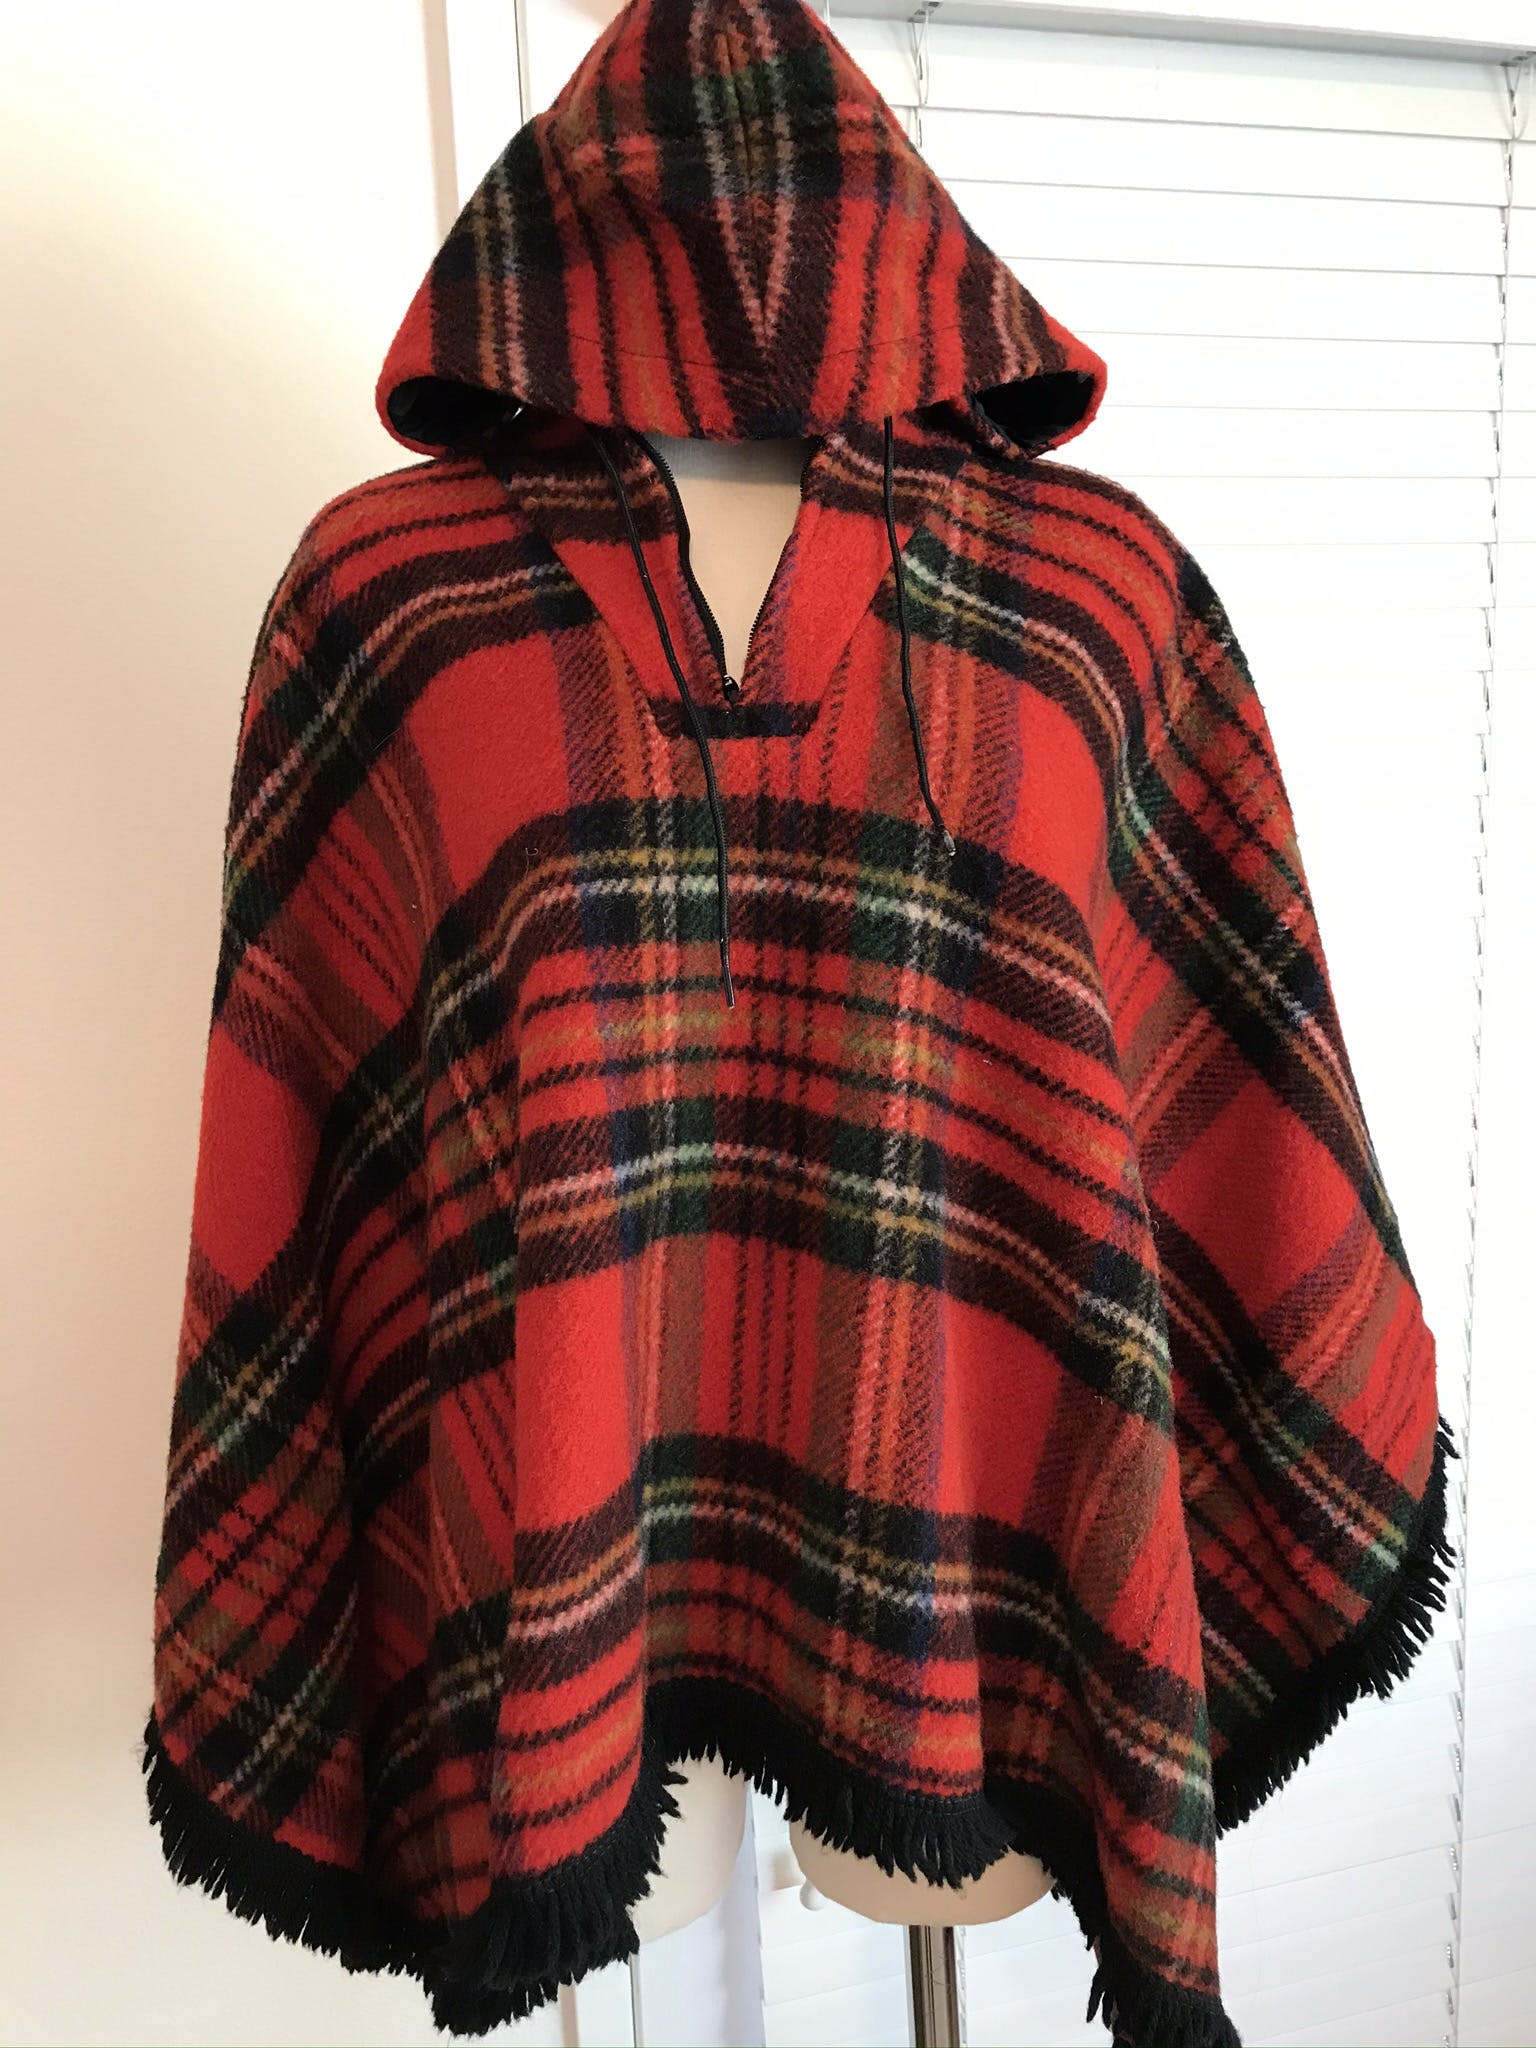 Vintage 70’s Wool Tartan Hooded Cape by Roos Atkins | Shop THRILLING